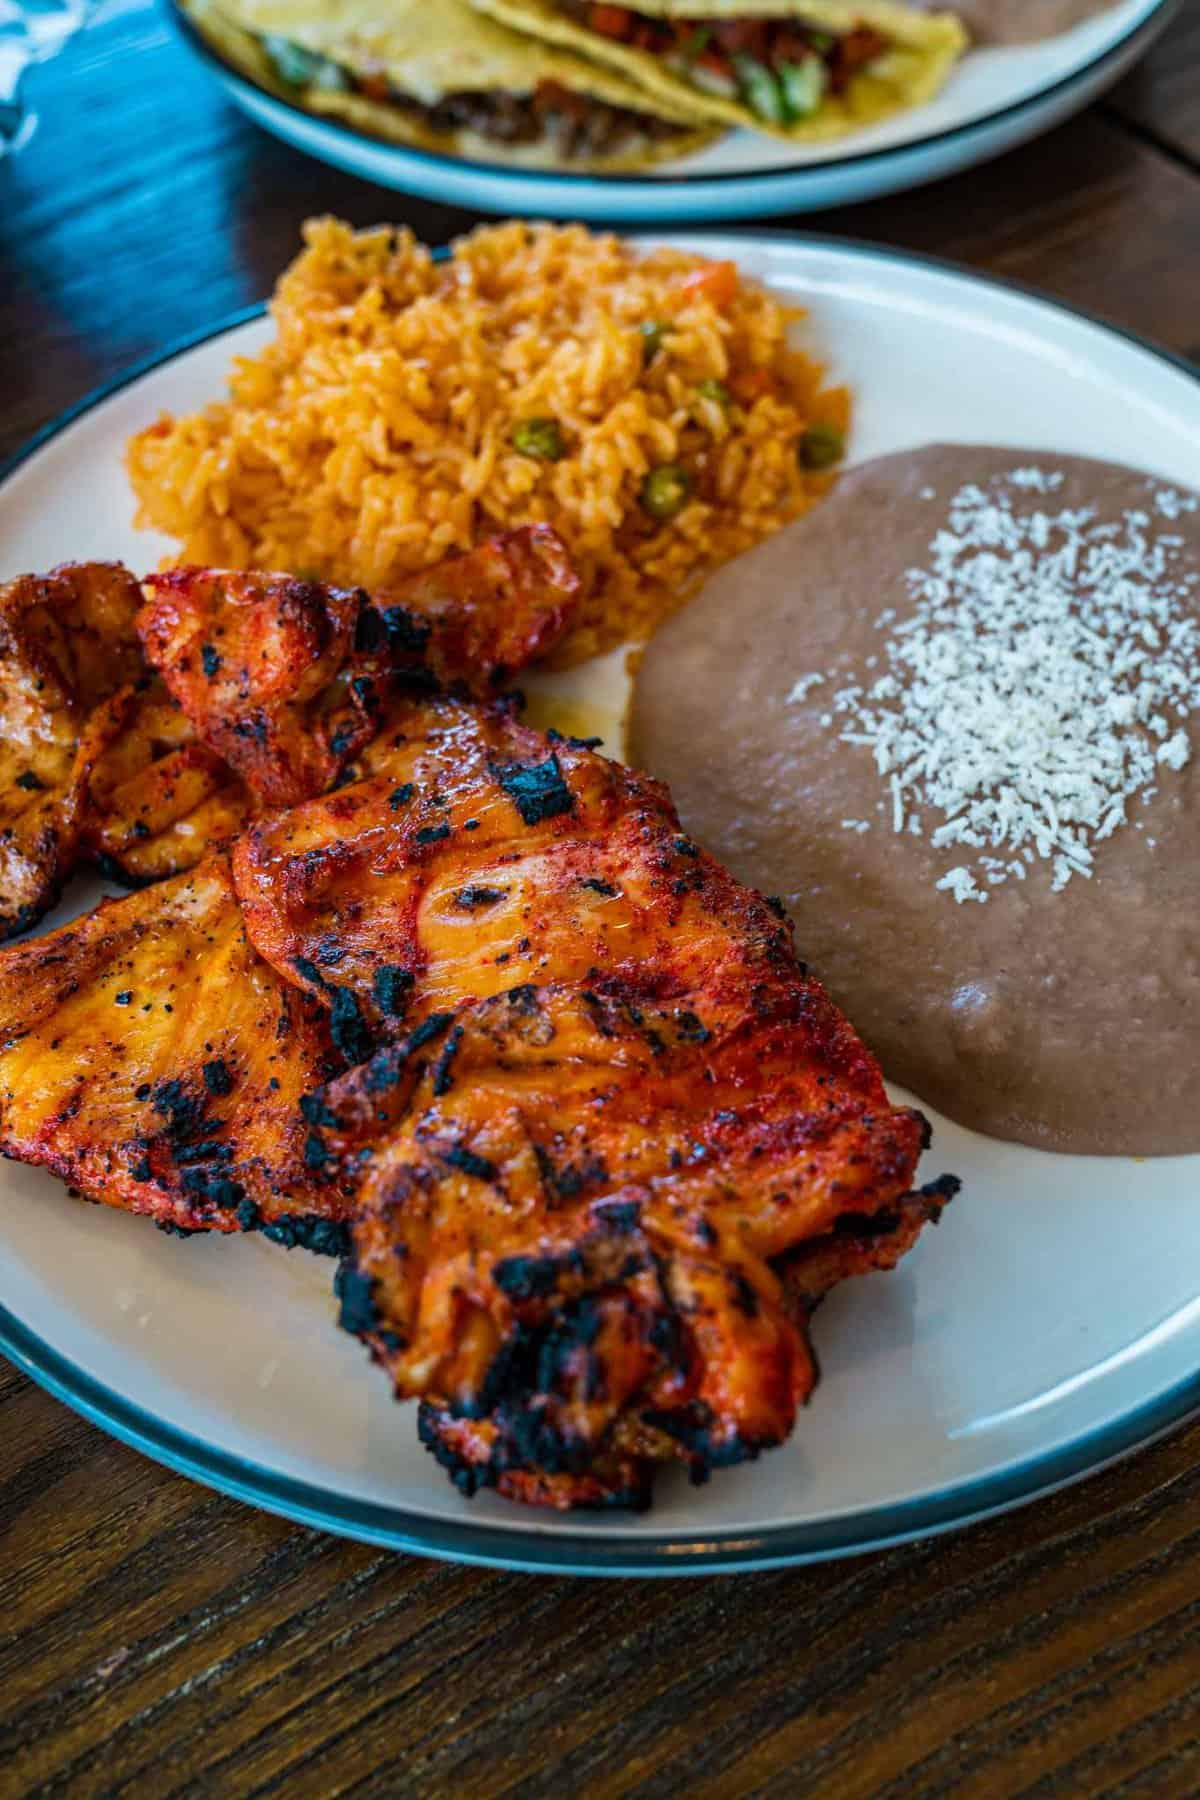 Grilled chicken seasoned with our signature spice blend. Served with rice, refried beans and 2 homemade corn tortillas.